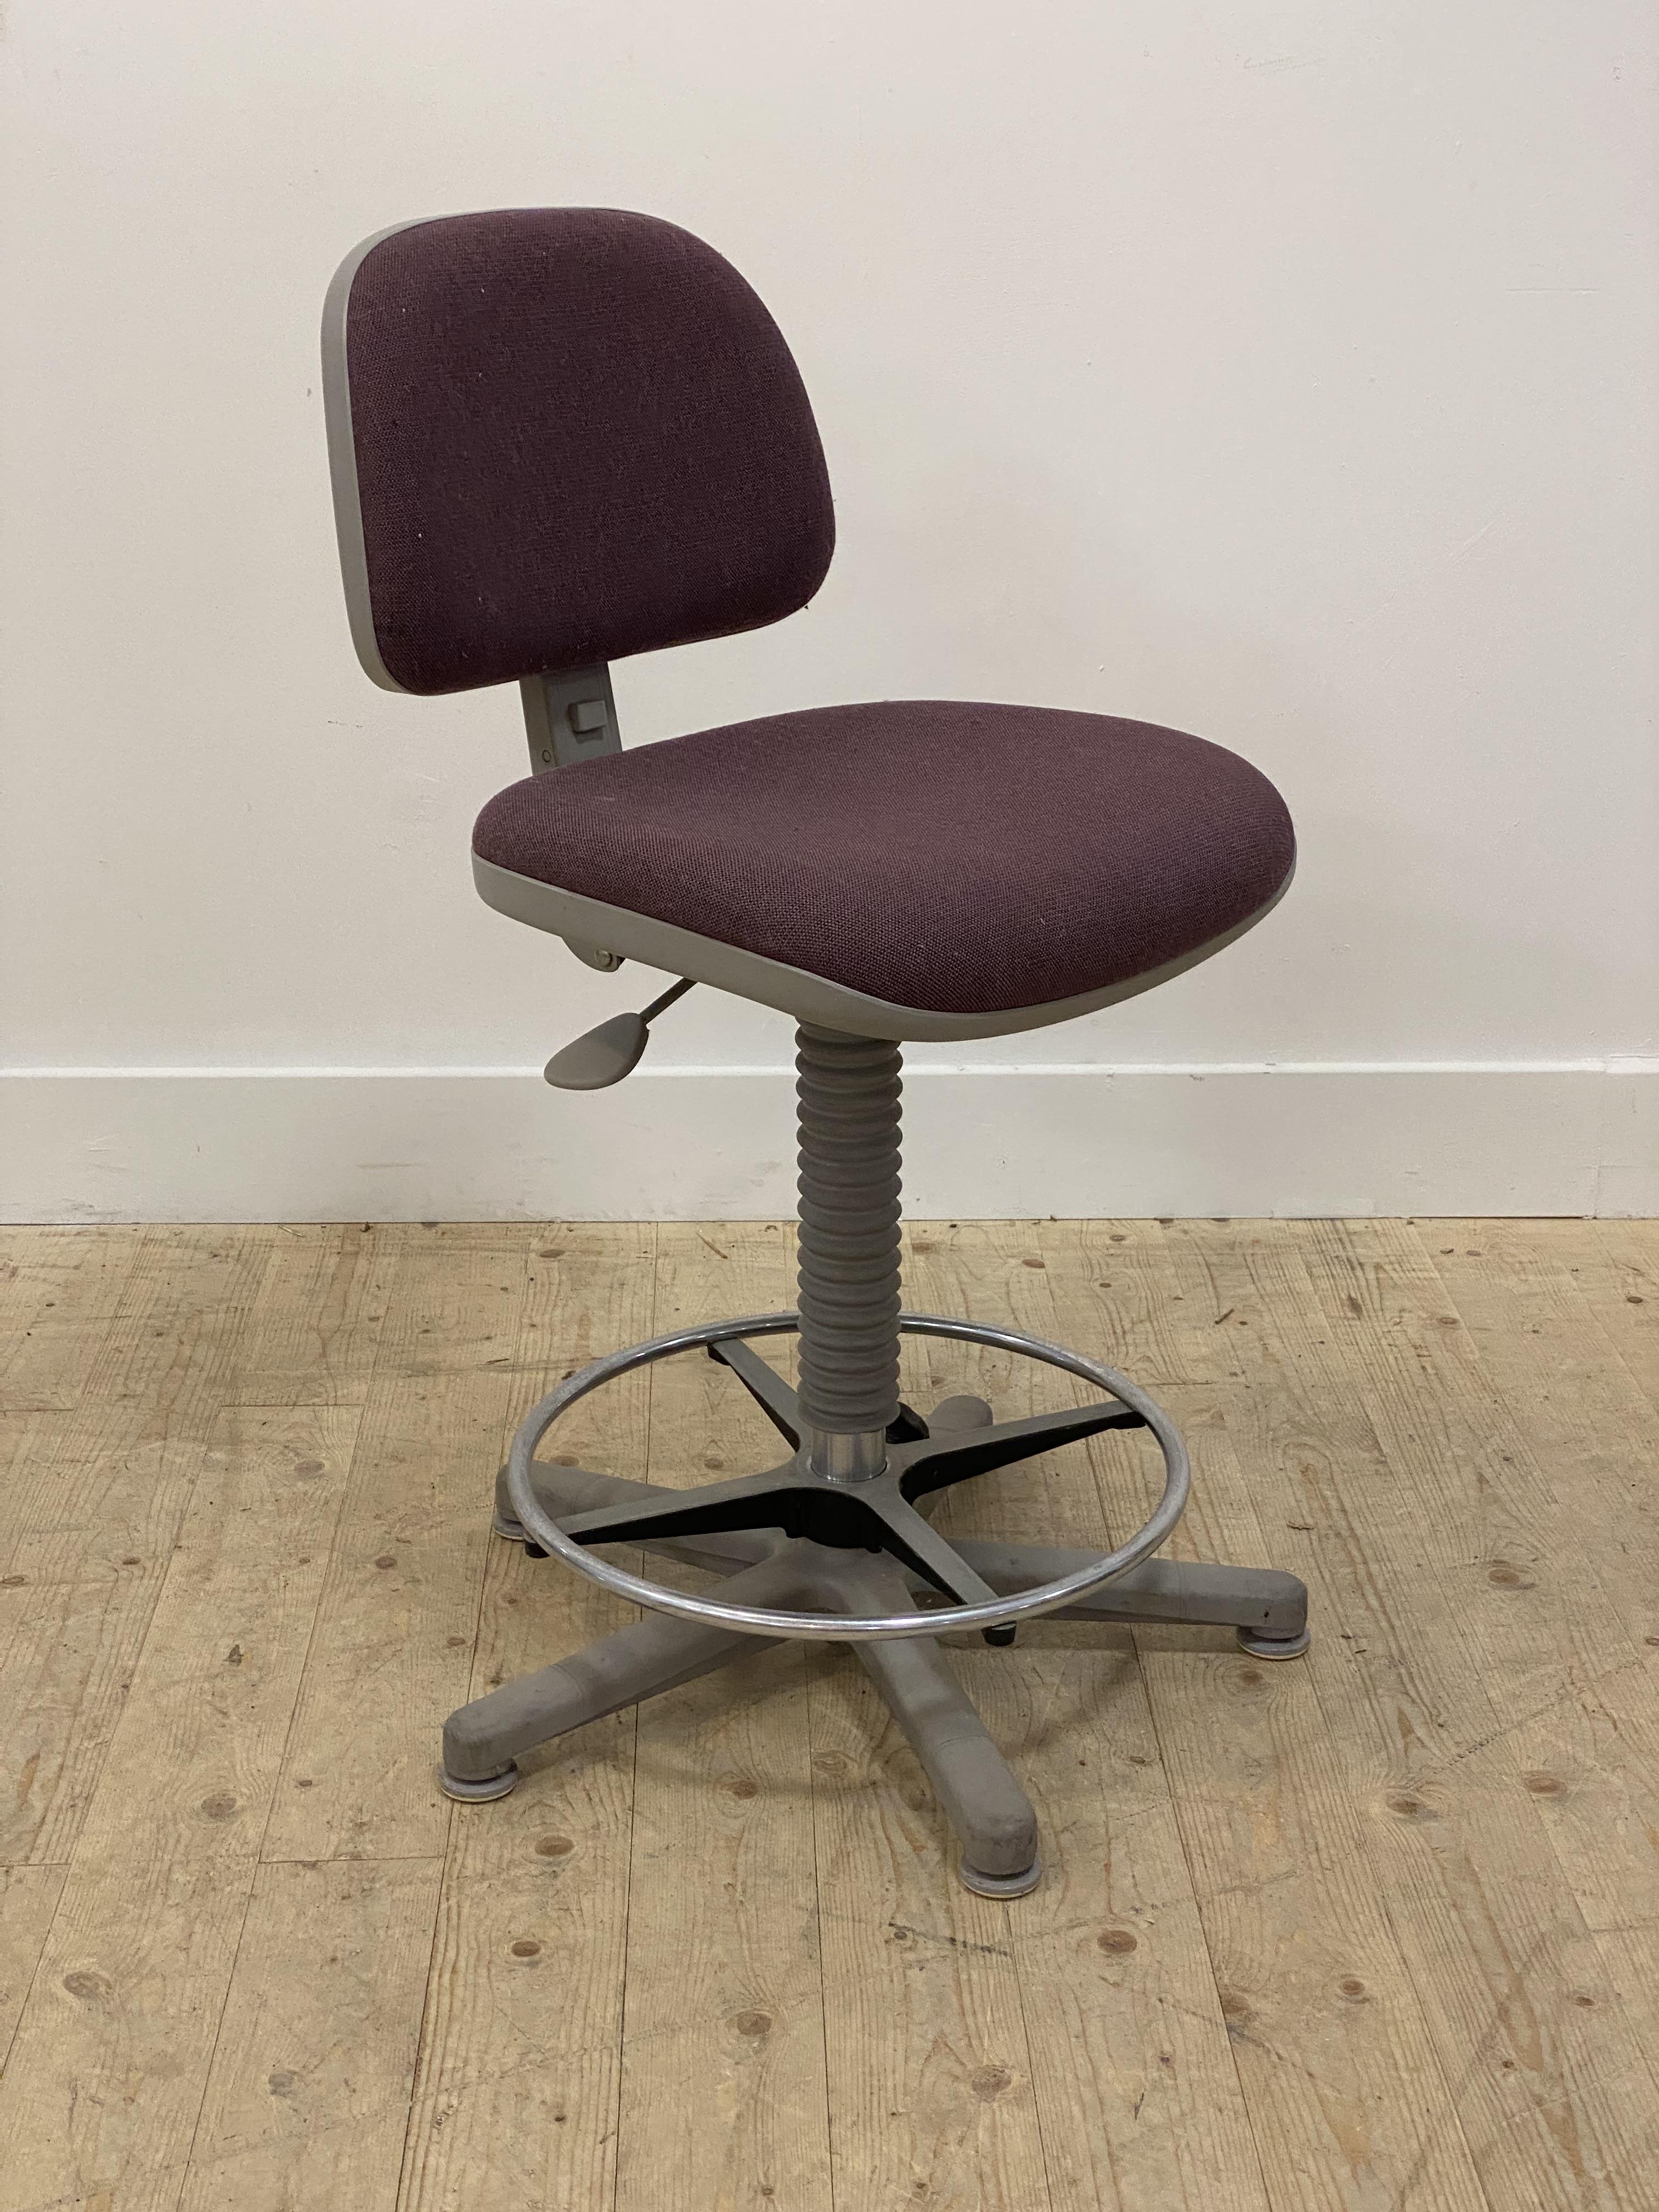 A vintage machinists type rise and fall swivel chair, with adjustable back rest H46cm